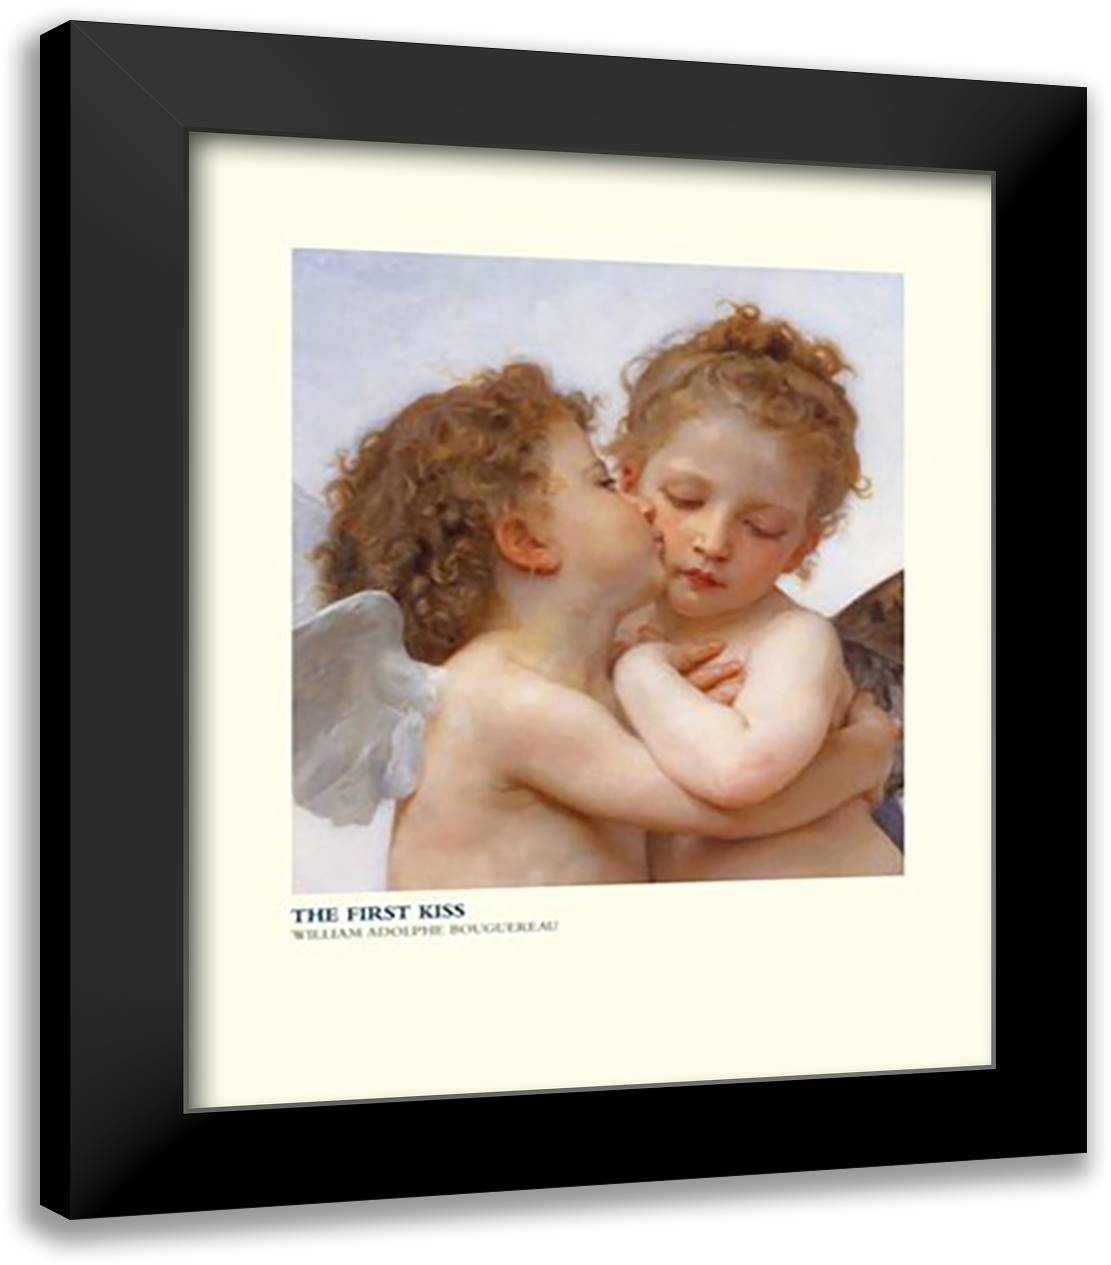 The First Kiss (Detail) 20x24 Black Modern Wood Framed Art Print Poster by Bouguereau, William Adolphe